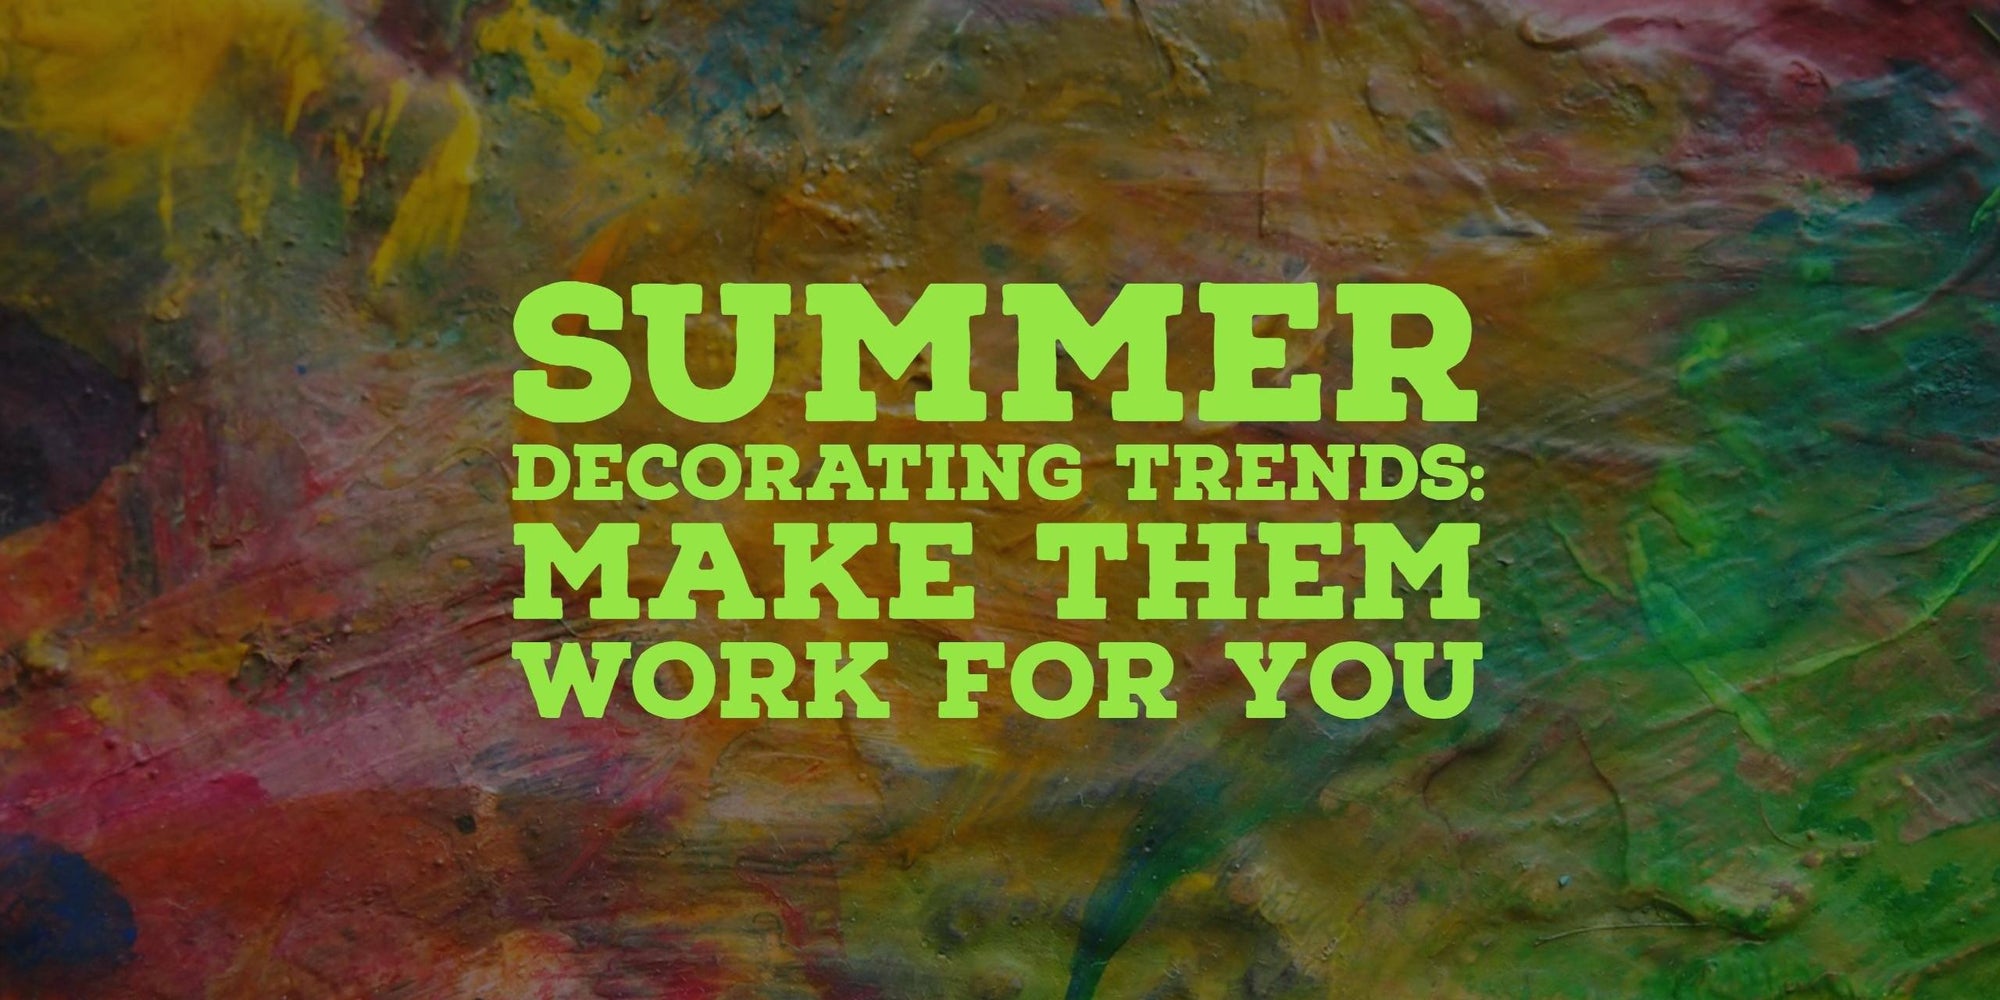 Summer Decorating Trends & How to Make Them Work for You